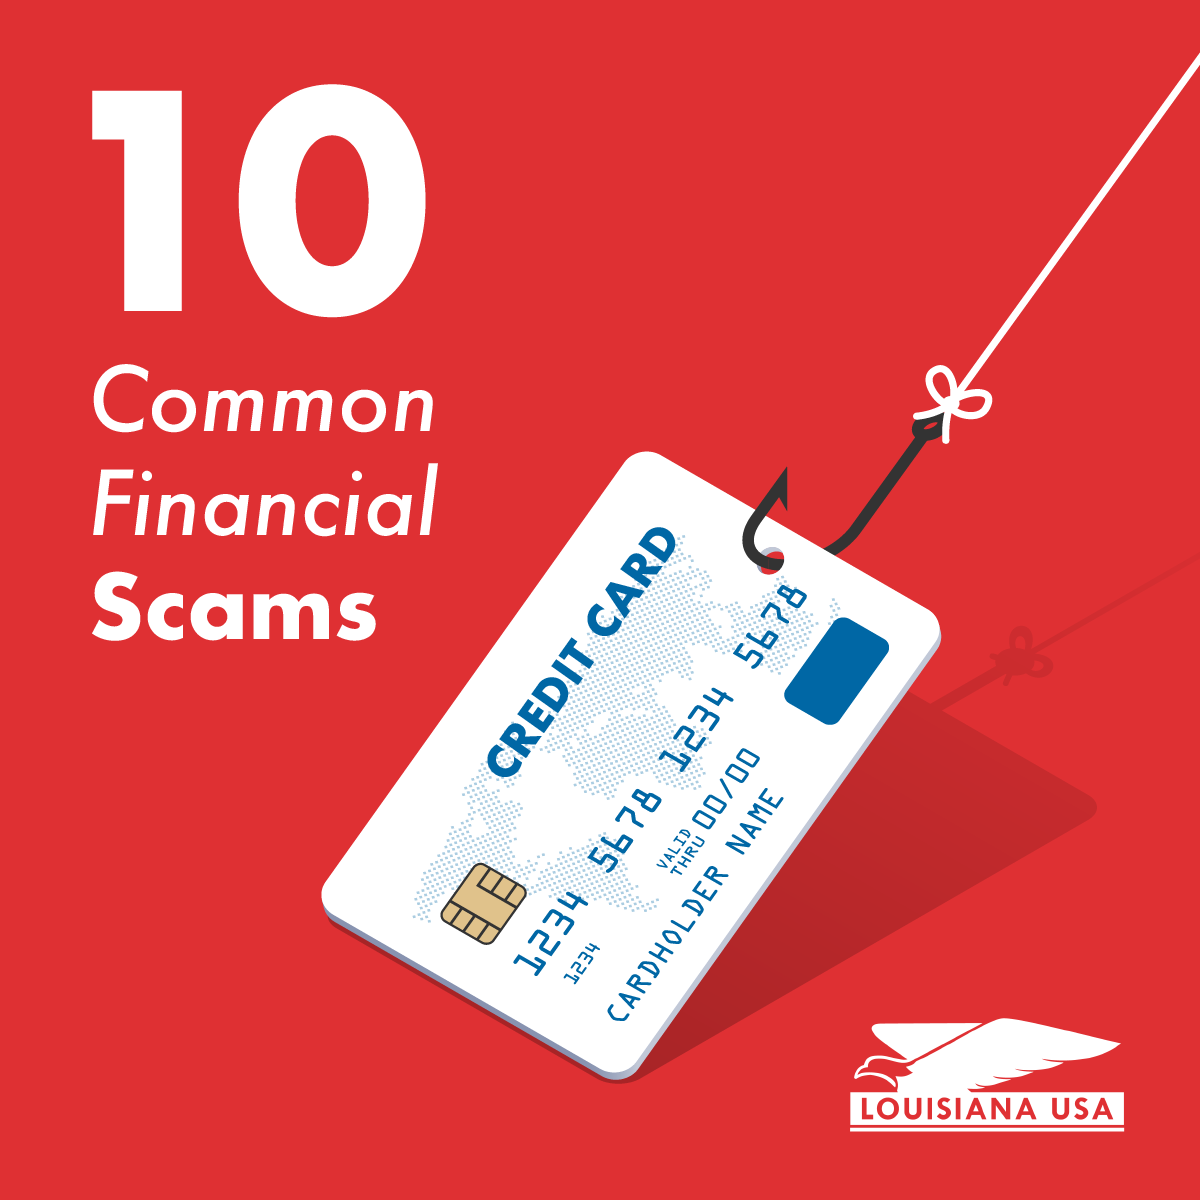 10 Common Financial Scams And How To Avoid Them